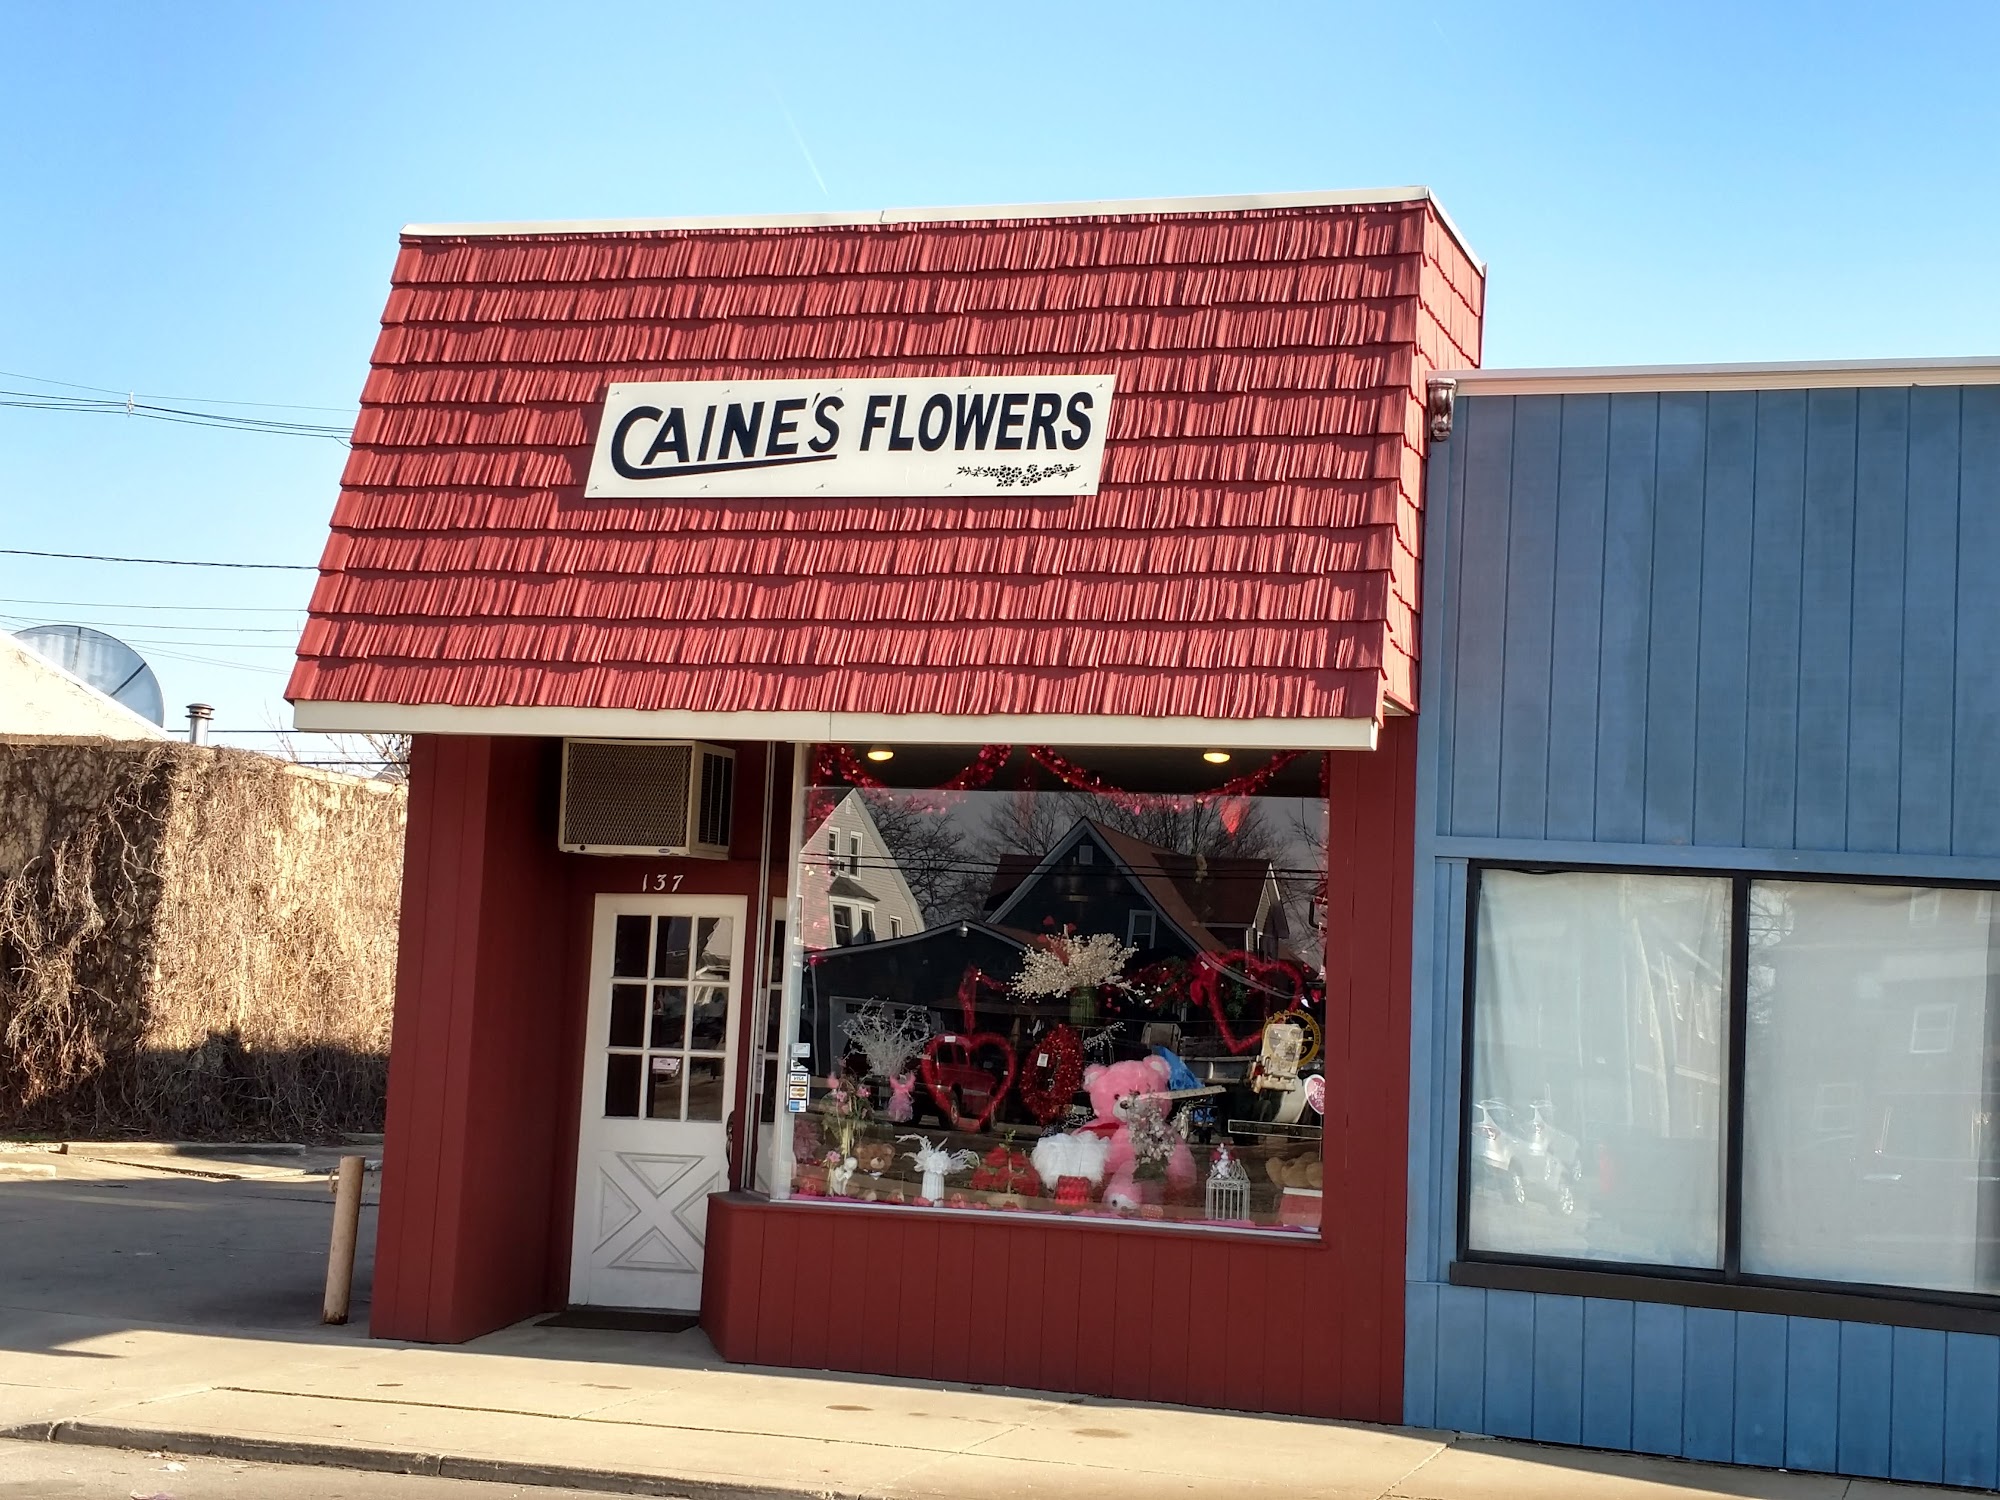 Caines Flowers